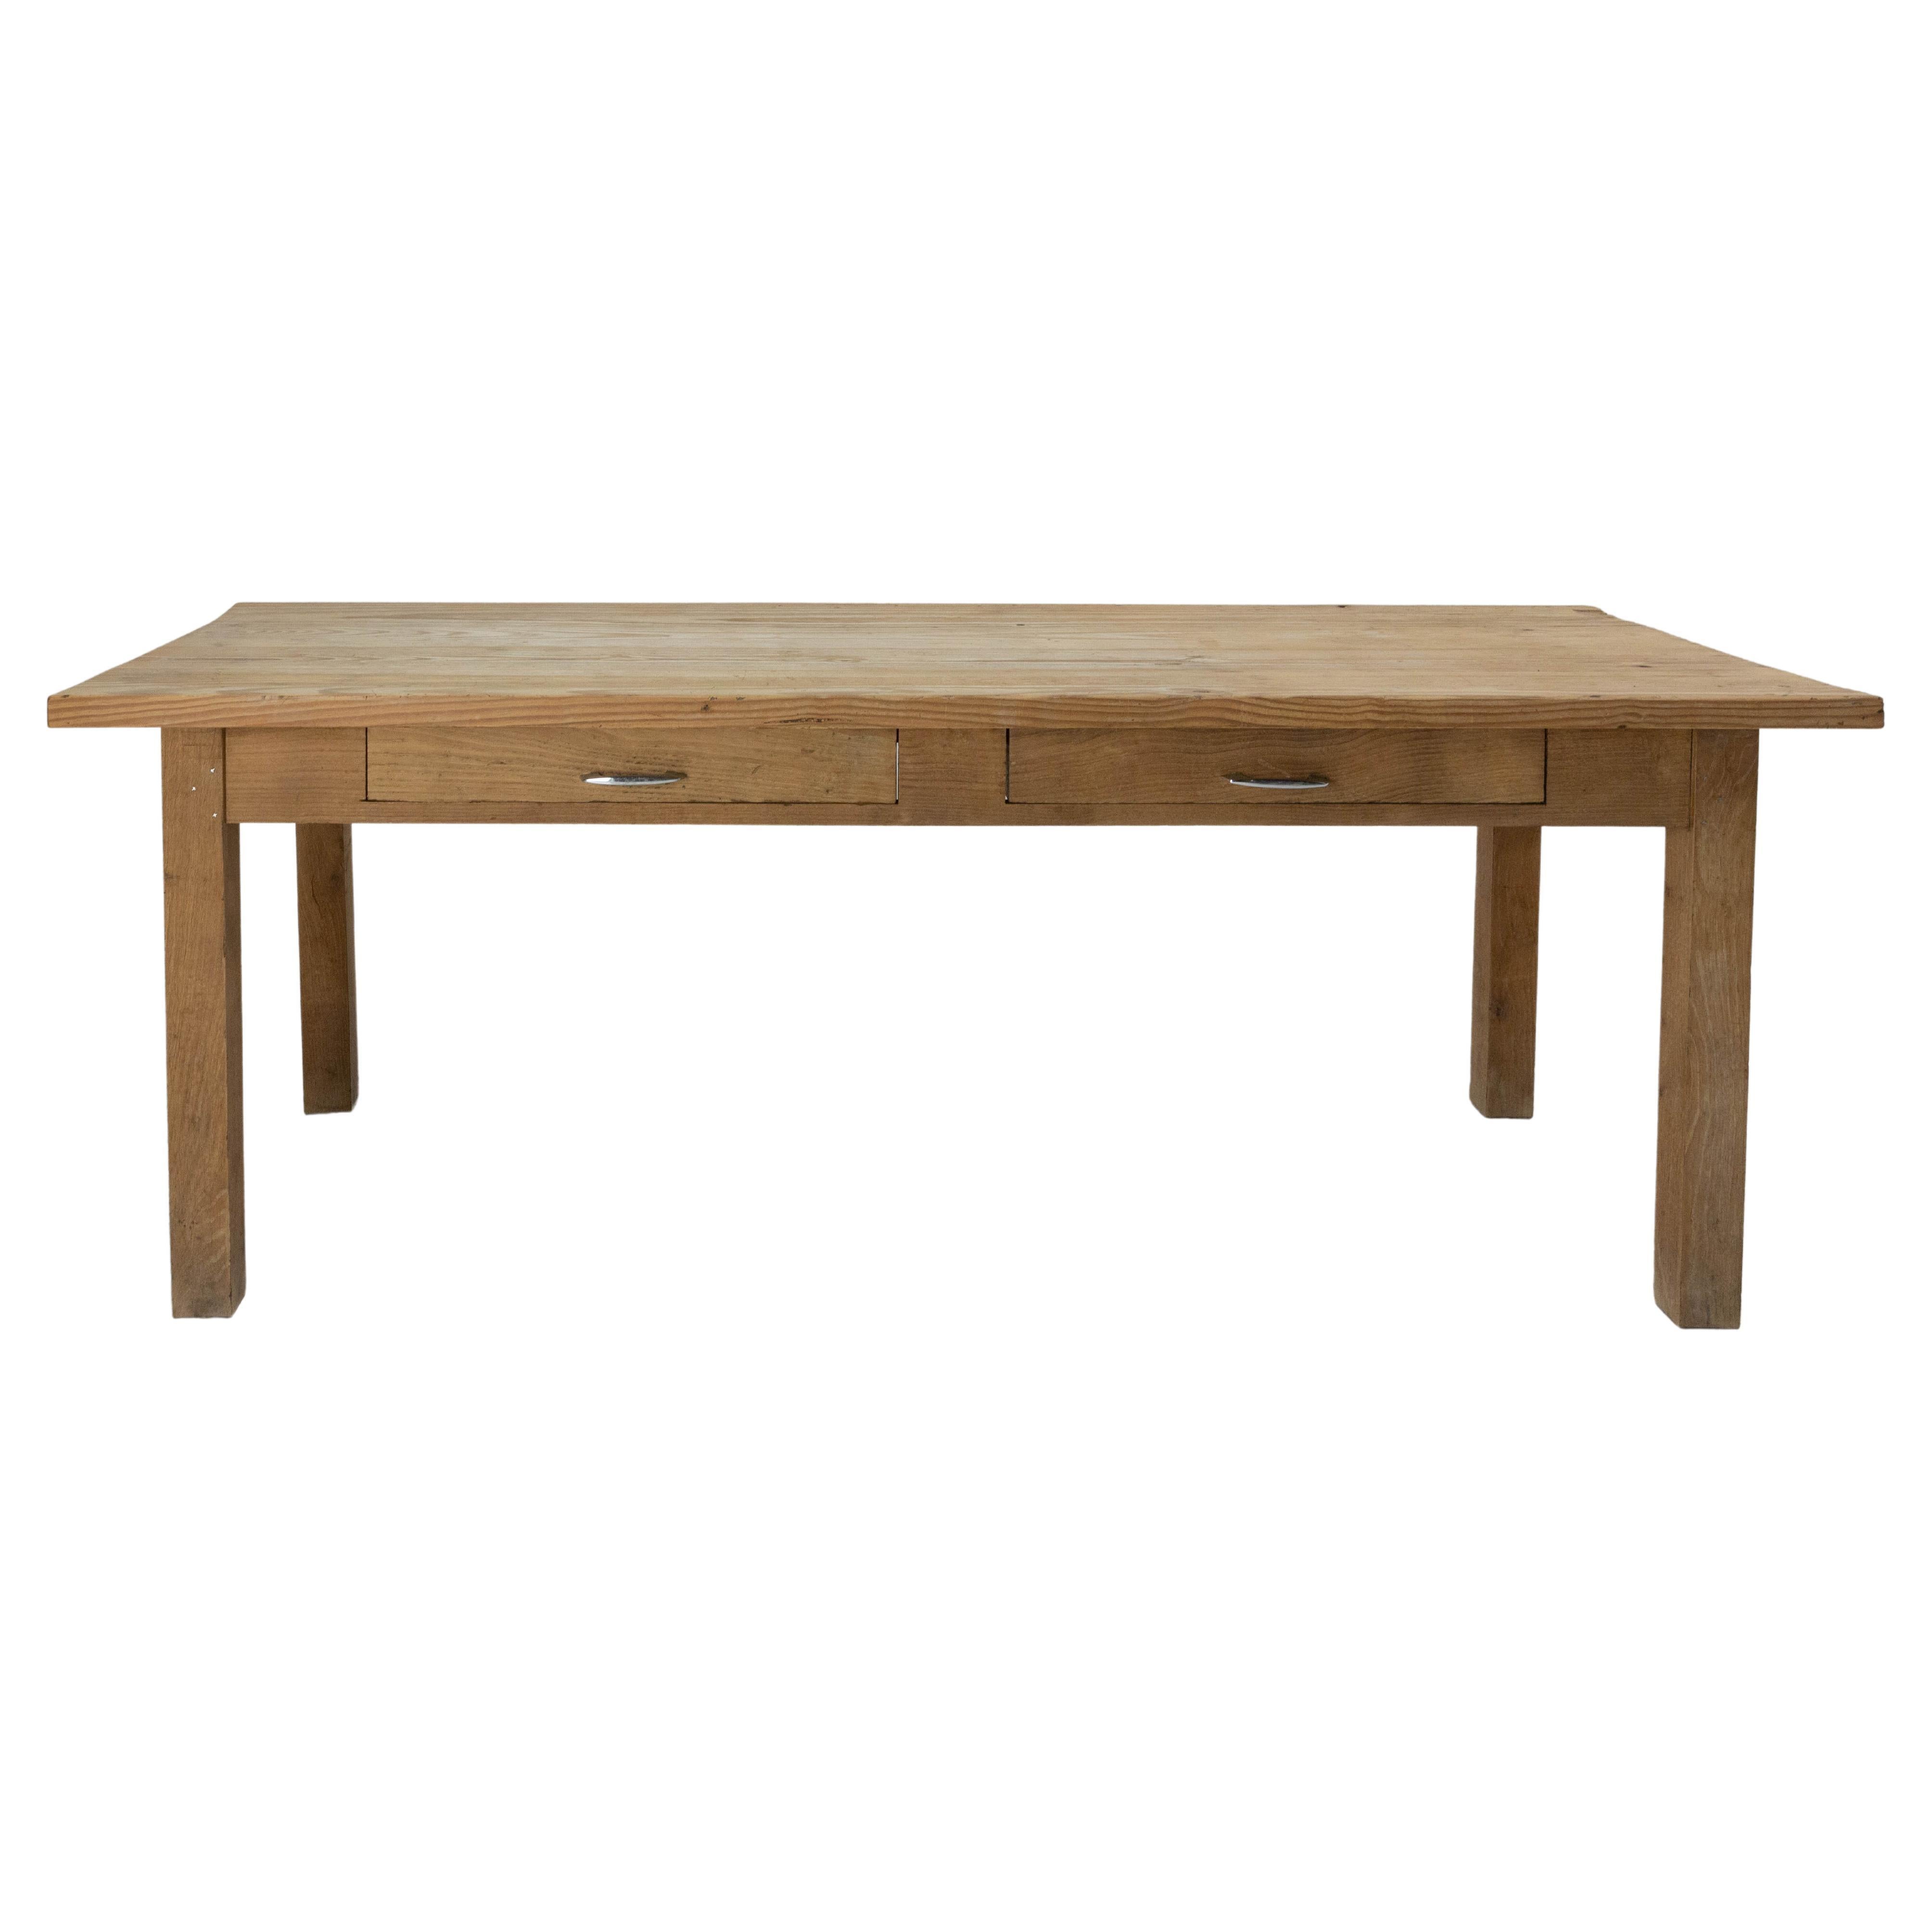 French Provincial Refectory Table Oak and Pine Server Dining Table, circa 1960